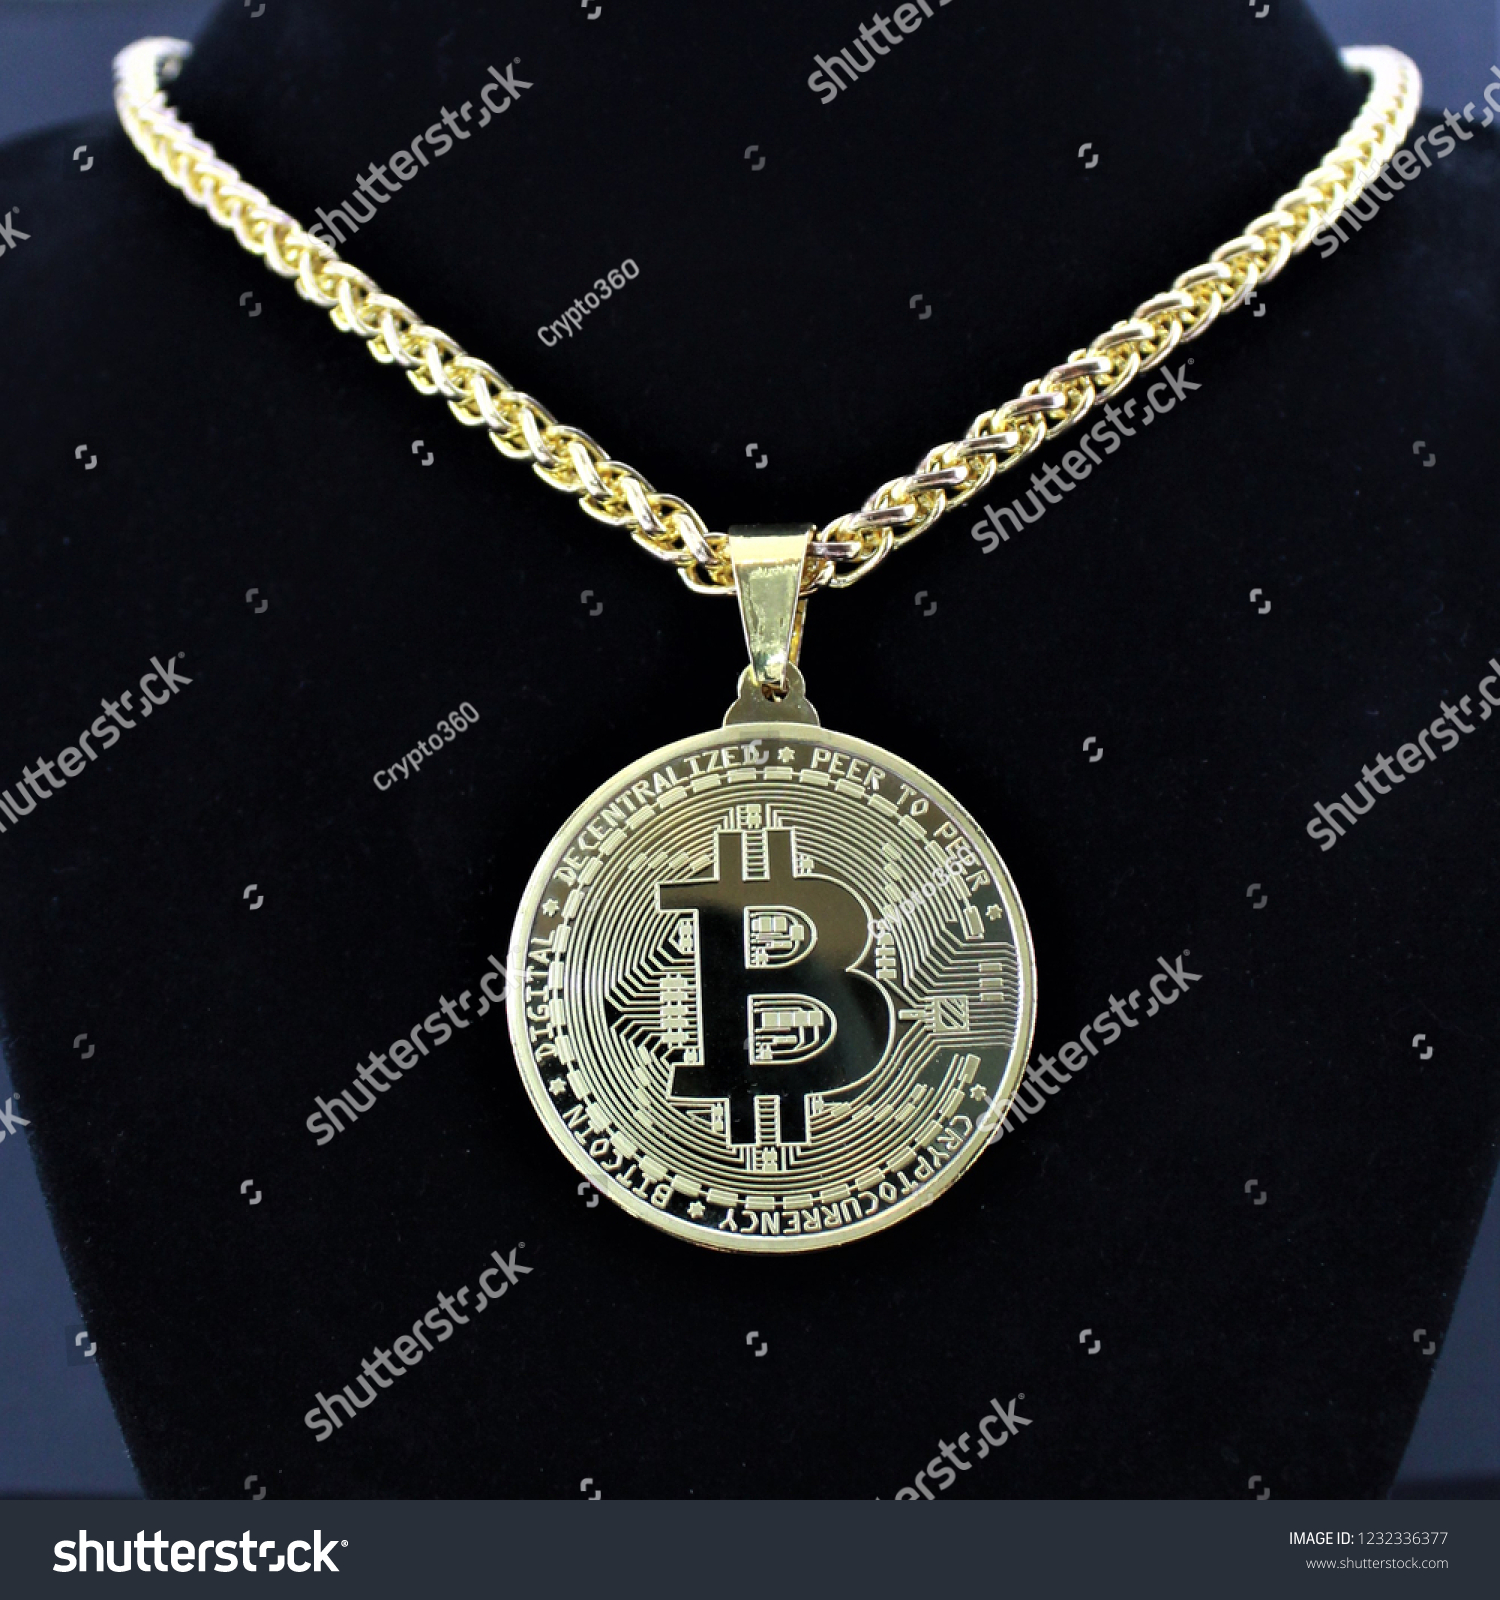 Gold Bitcoin Necklace Gold Chain Bitcoin Stock Photo Edit Now 1232336377